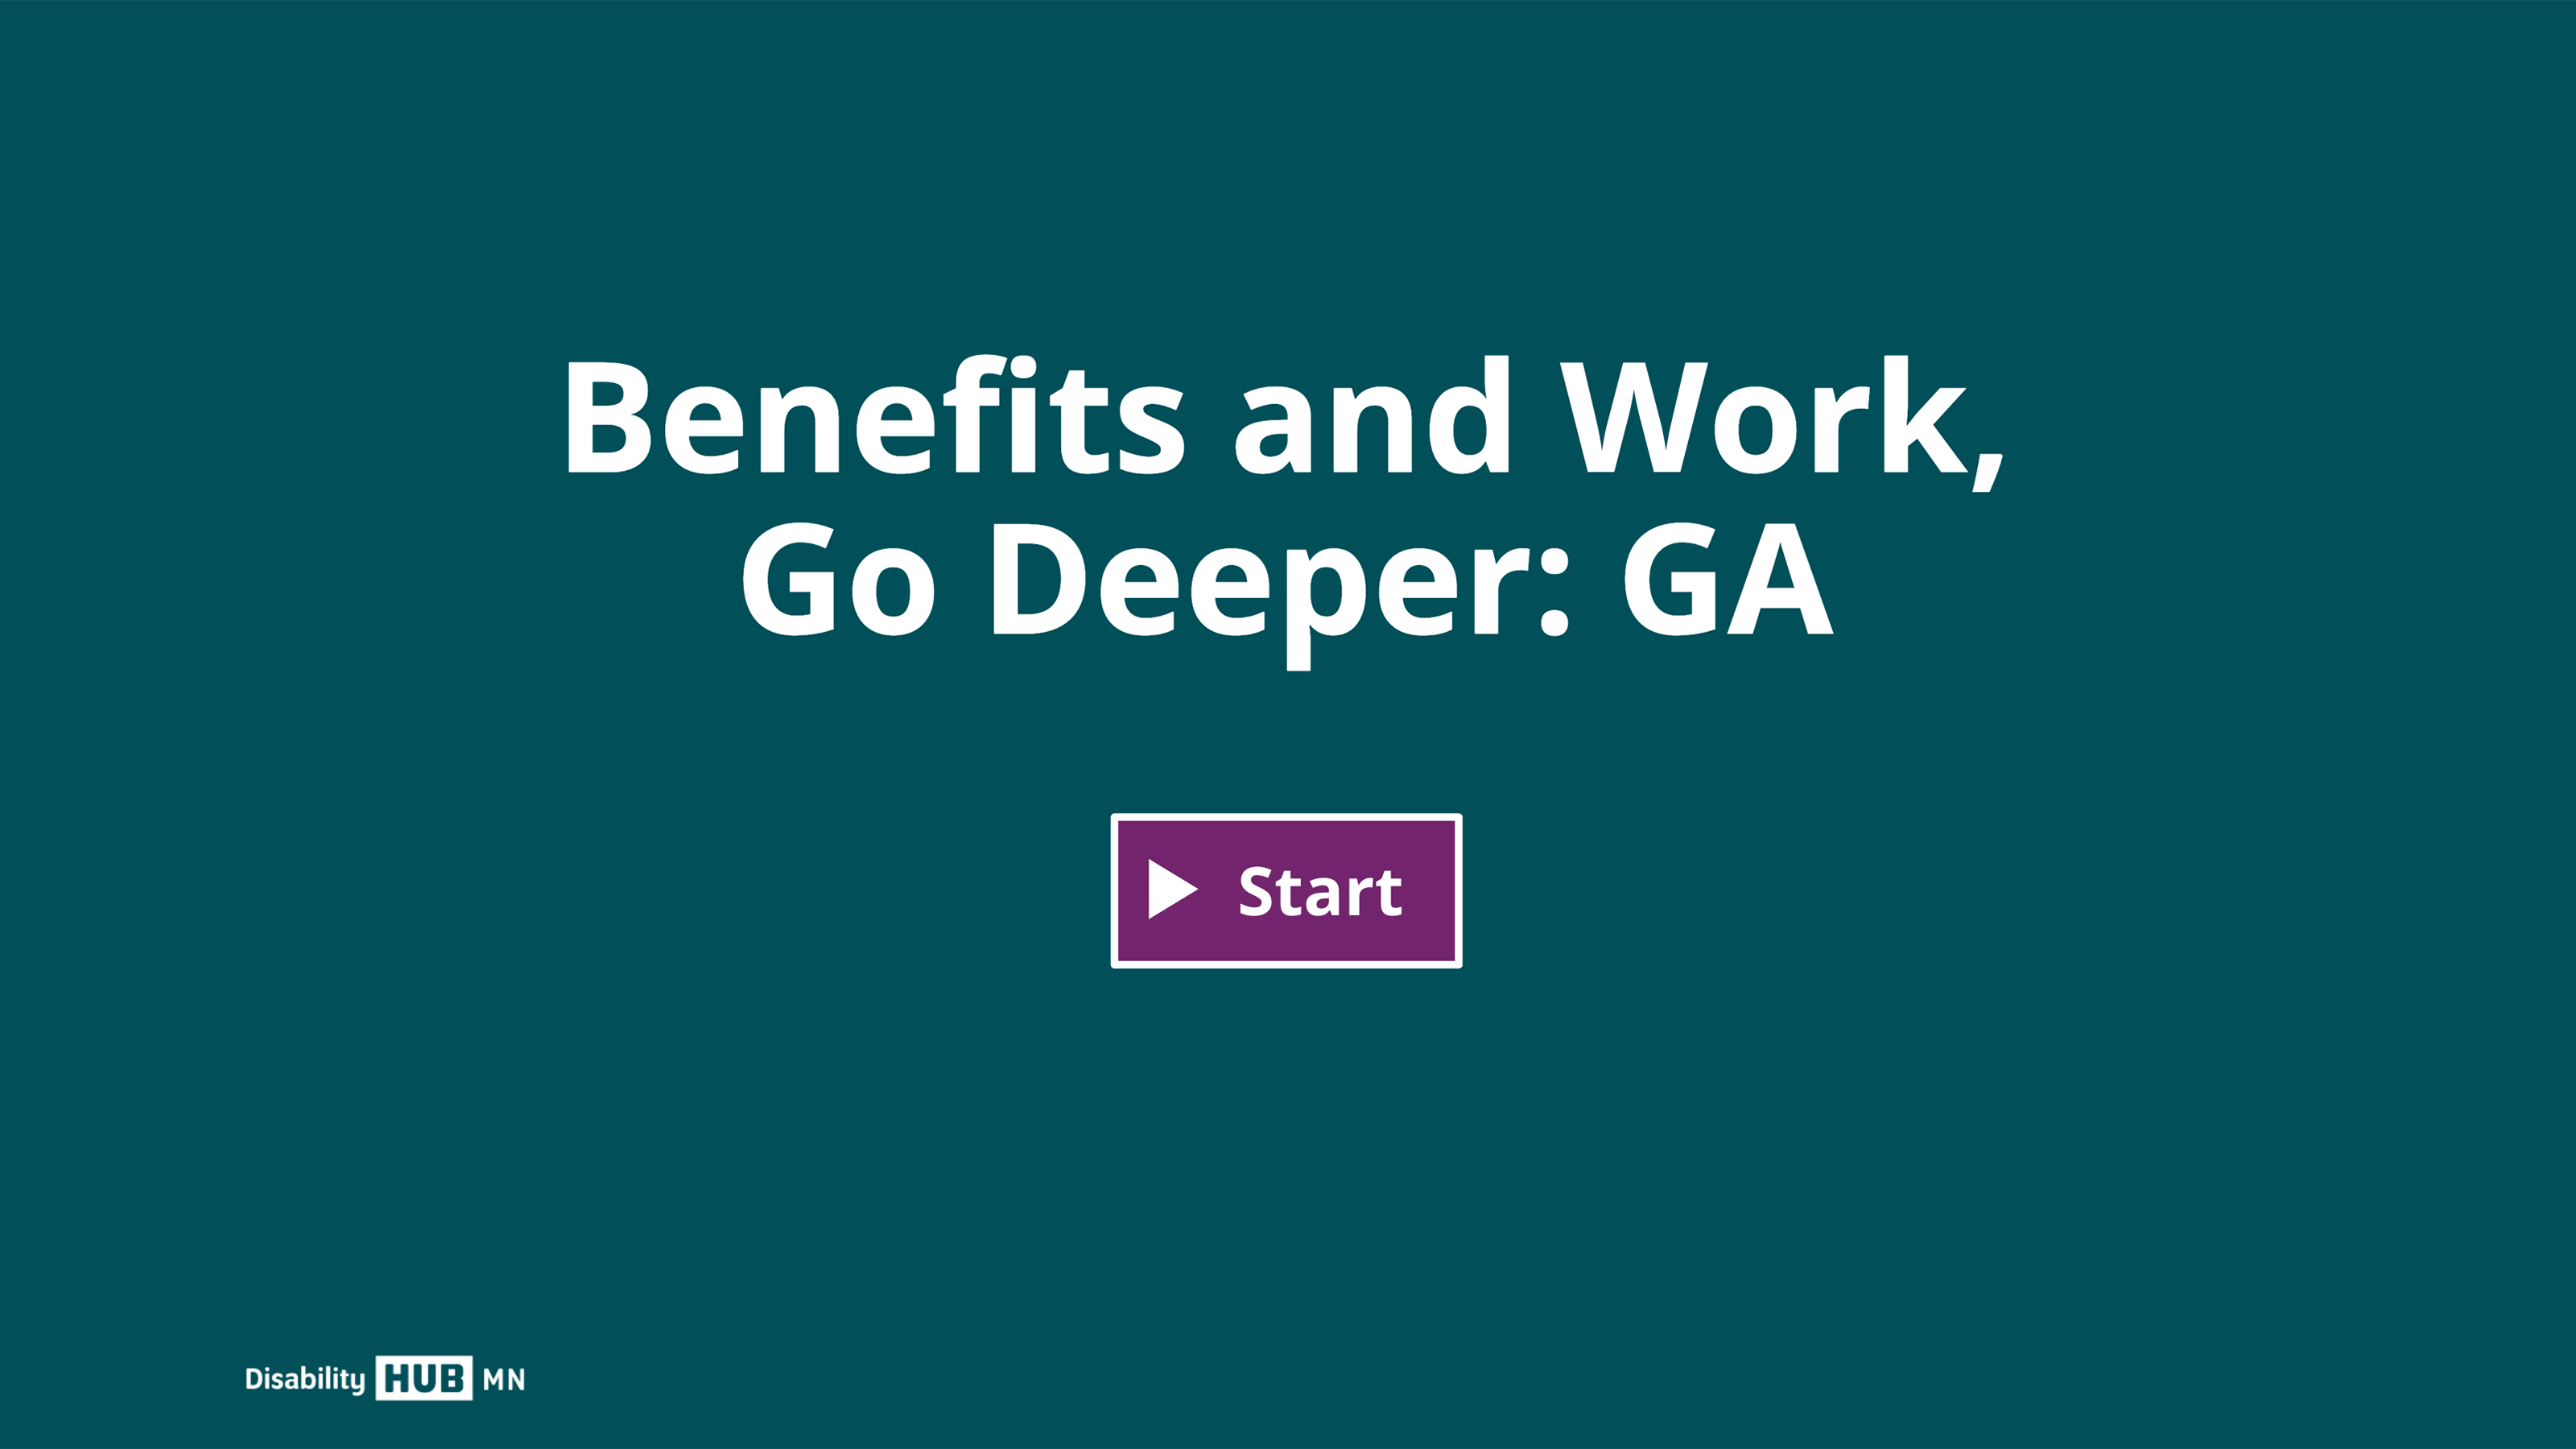 Click this image to begin the Benefits and Work, Go Deeper: GA e-learning